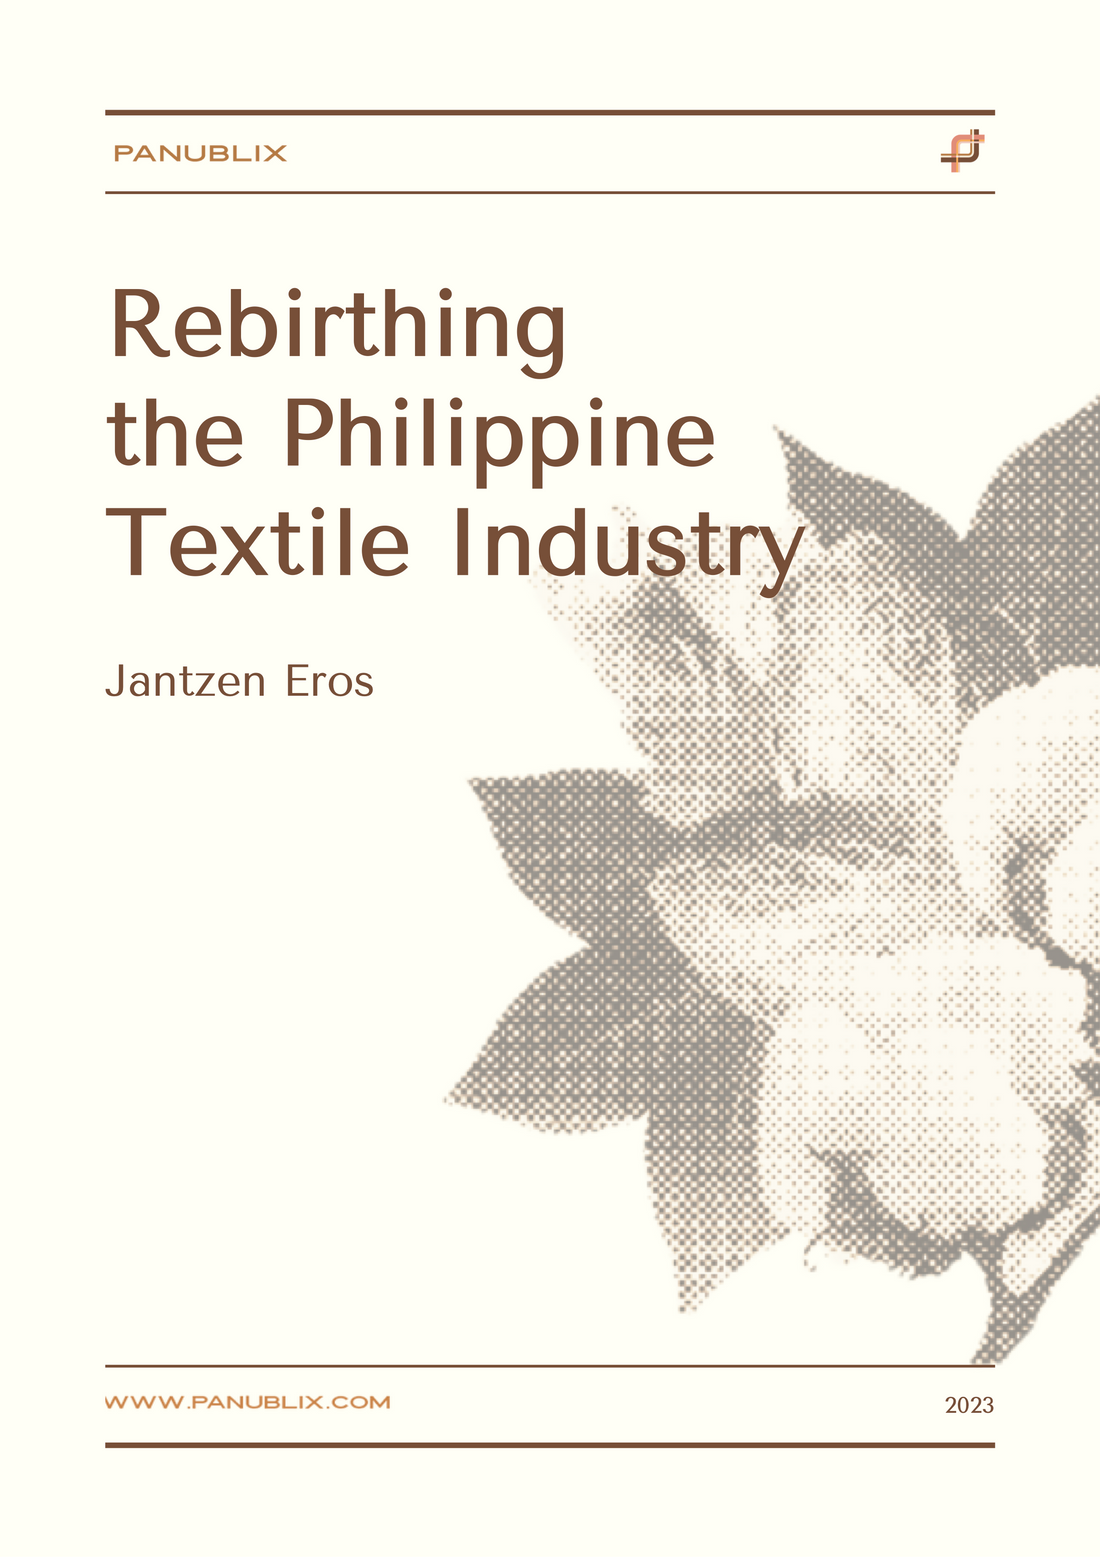 Data Story: Rebirthing the Philippine Textile Industry